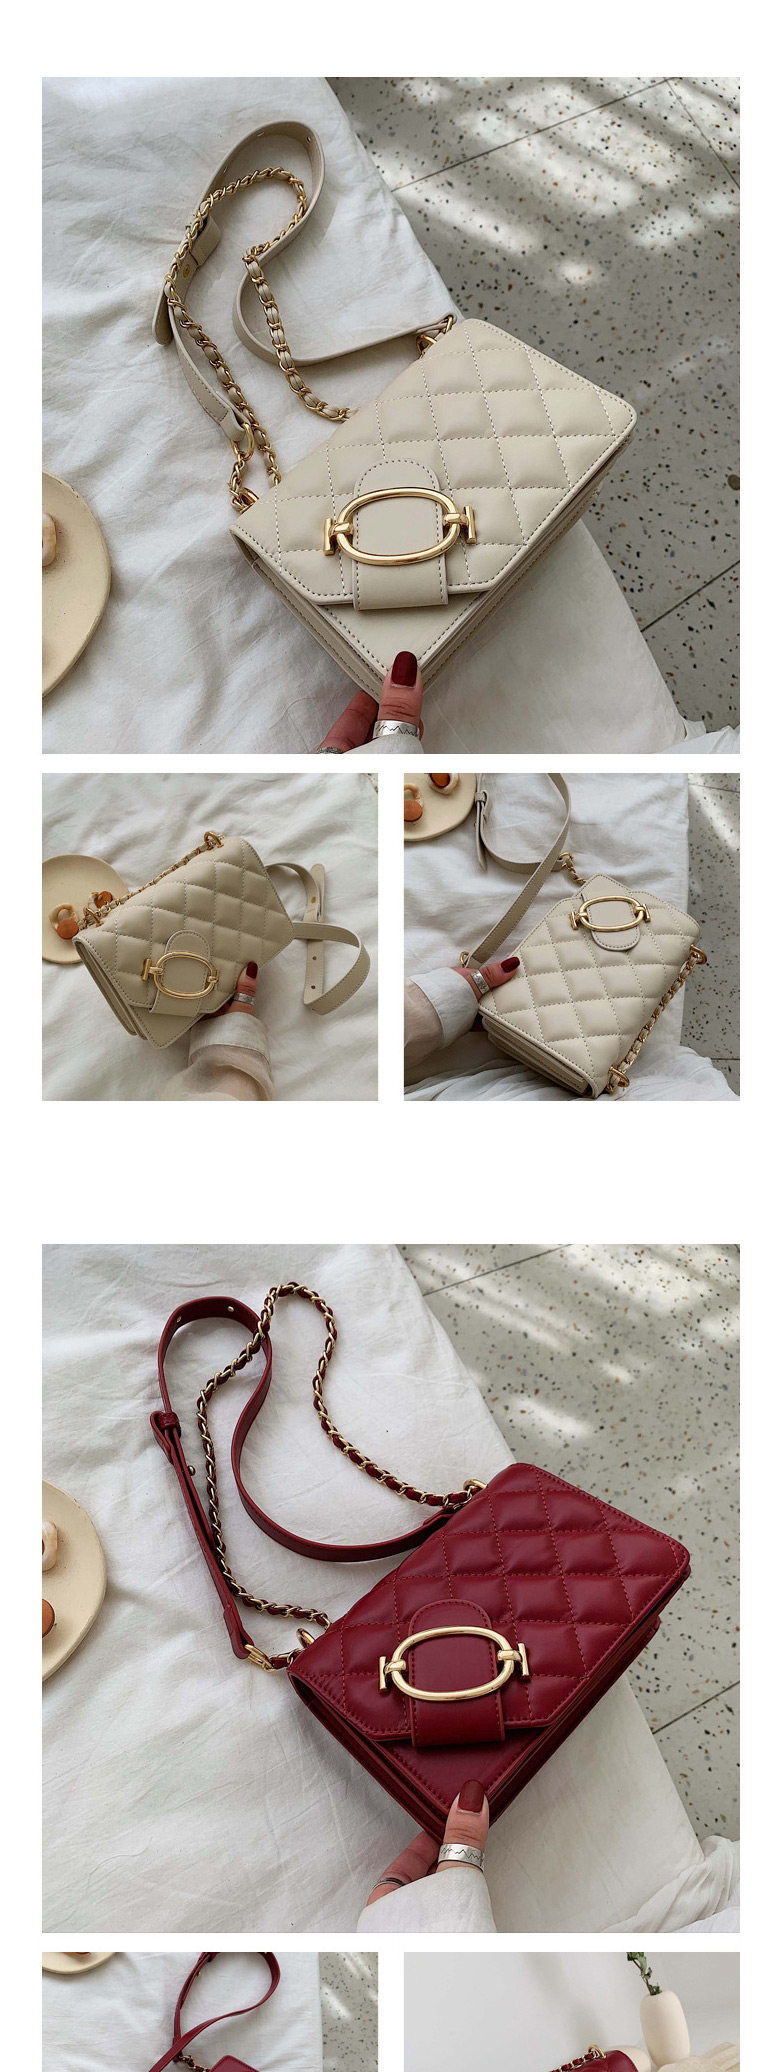 Fashion Creamy-white Chain Rhombic Embroidery Shoulder Bag,Shoulder bags